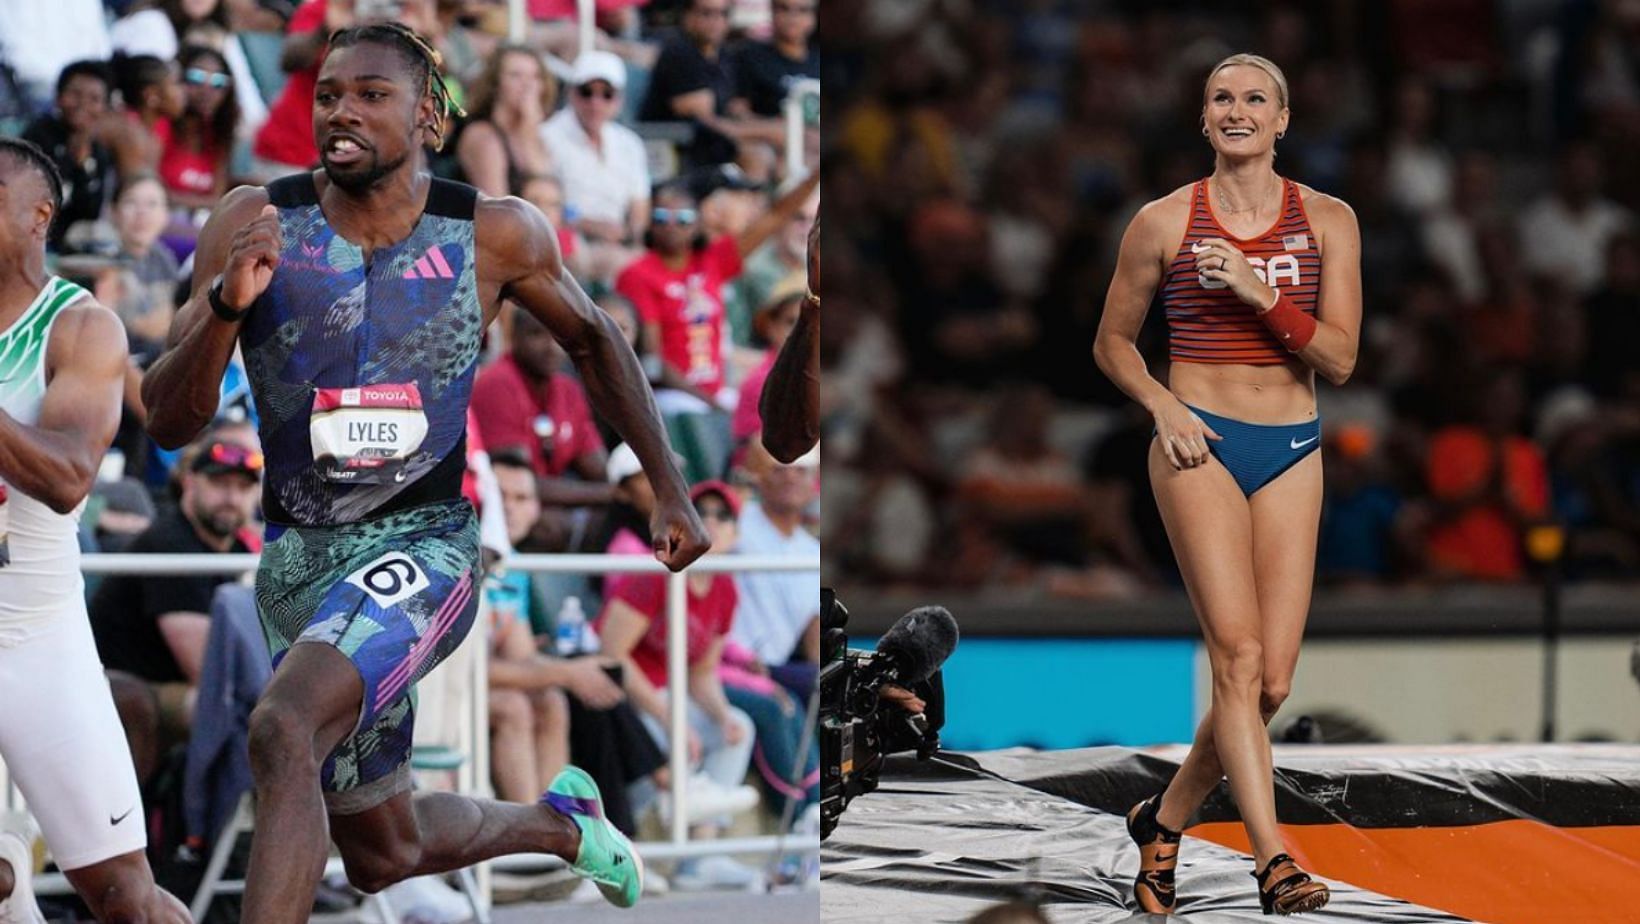 Here are five athletes you need to watch out for at the USATF Indoor Championships 